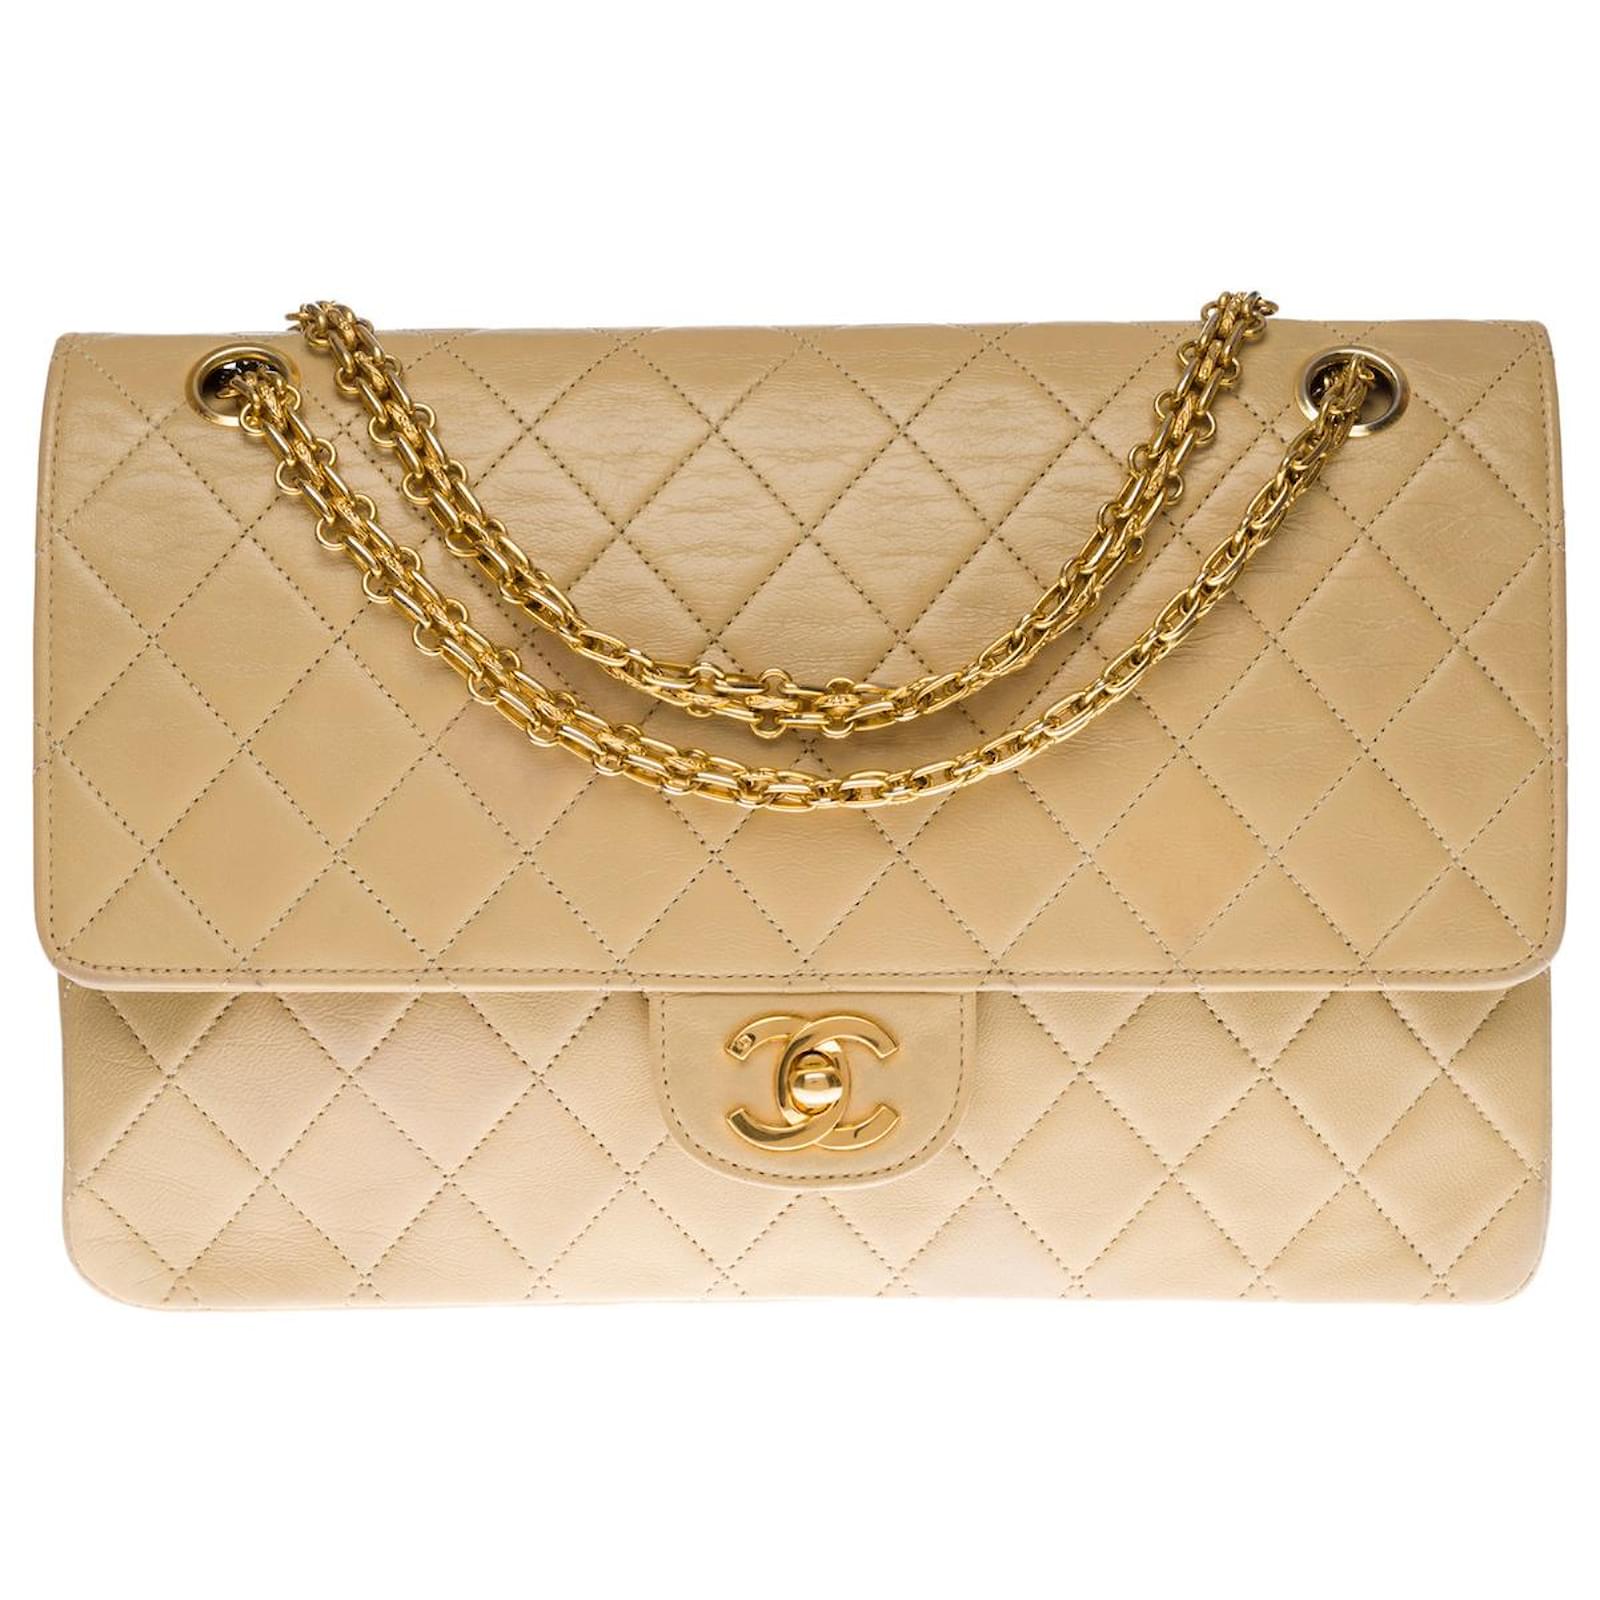 Chanel Classic shoulder Flap bag in beige quilted lambskin and